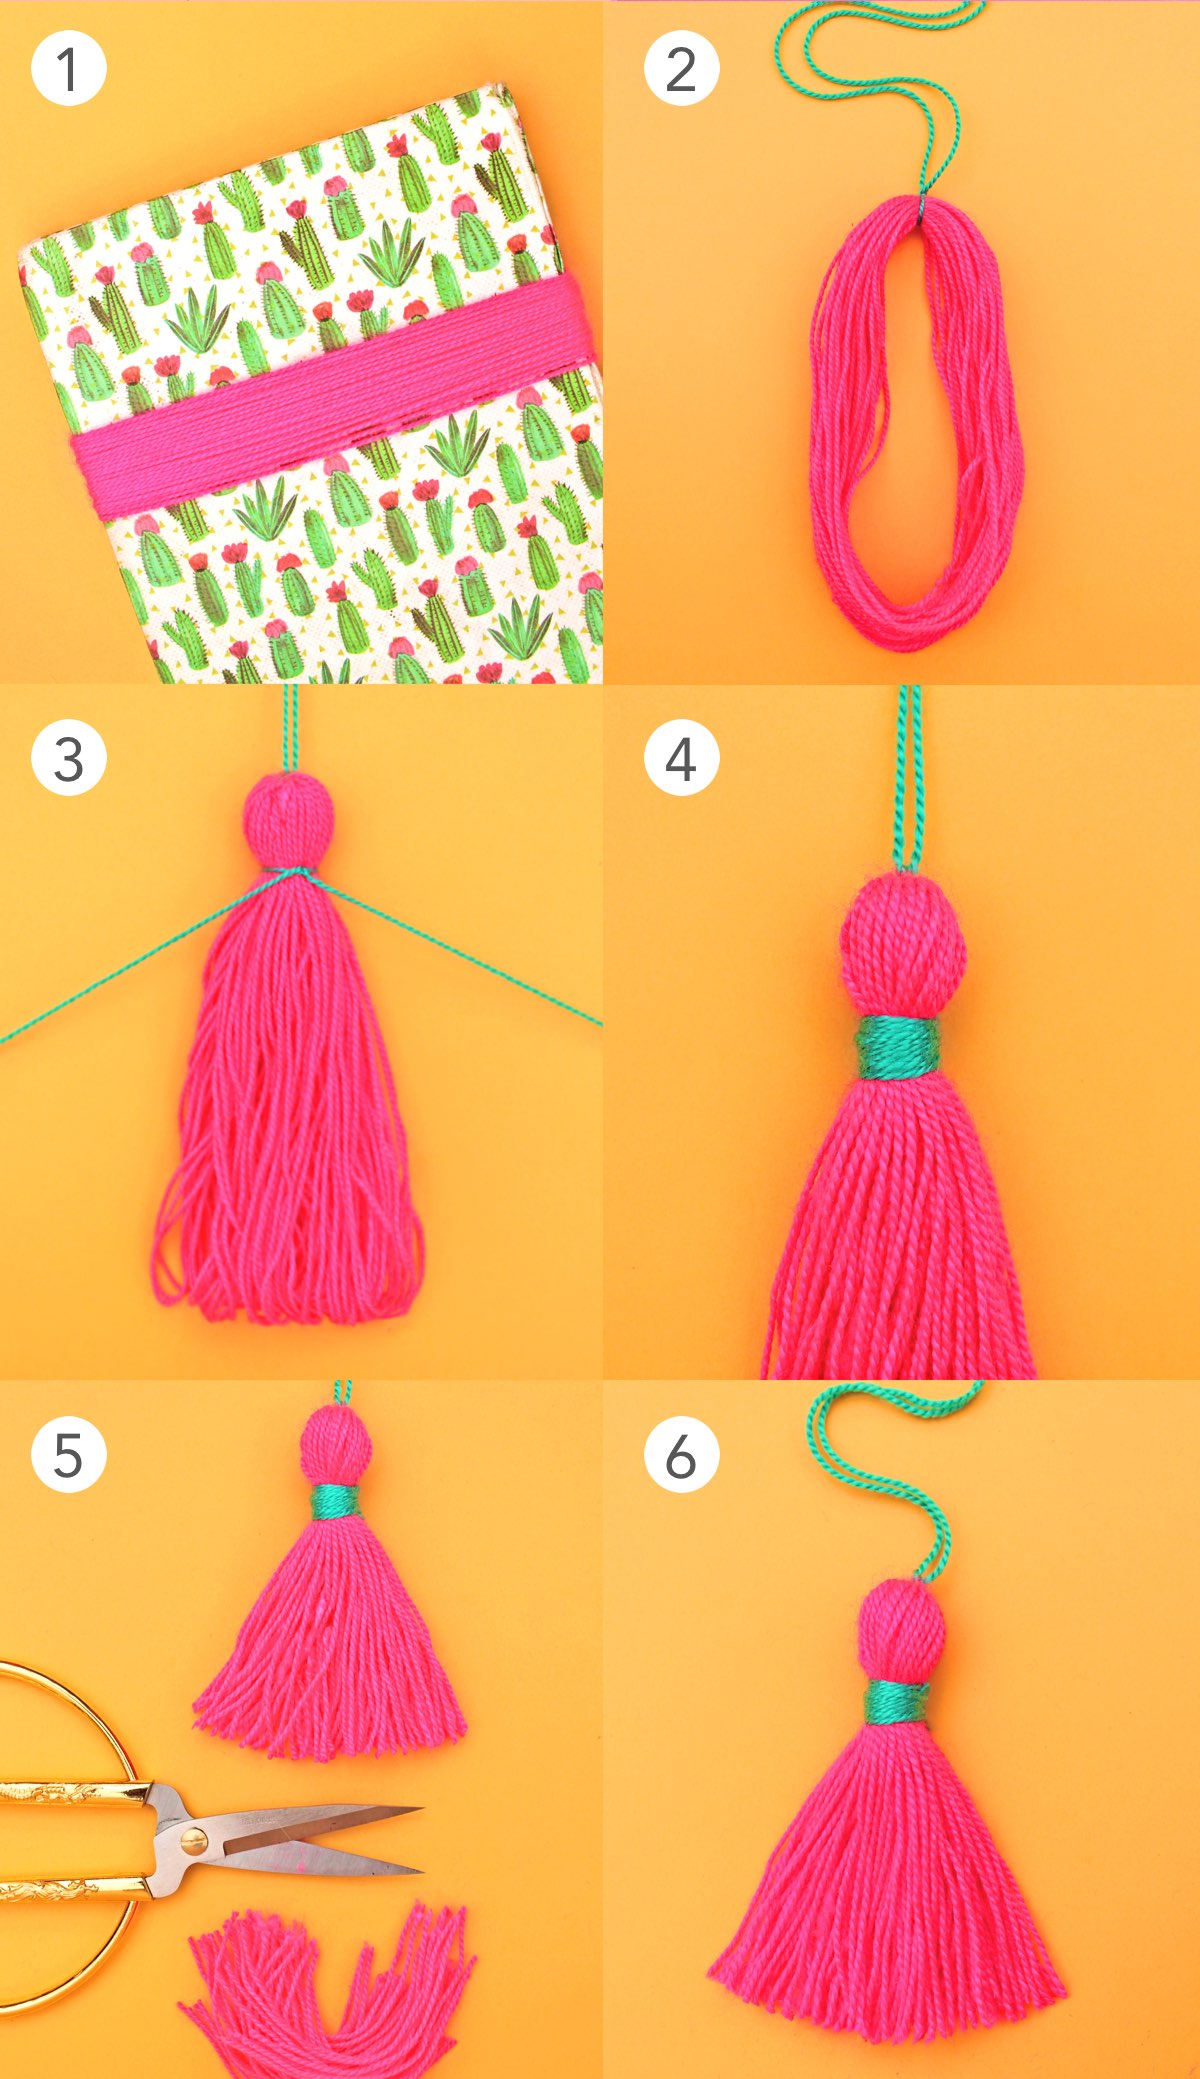 How To Make Yarn Tassels Diy Craft Decorations • Happythought 